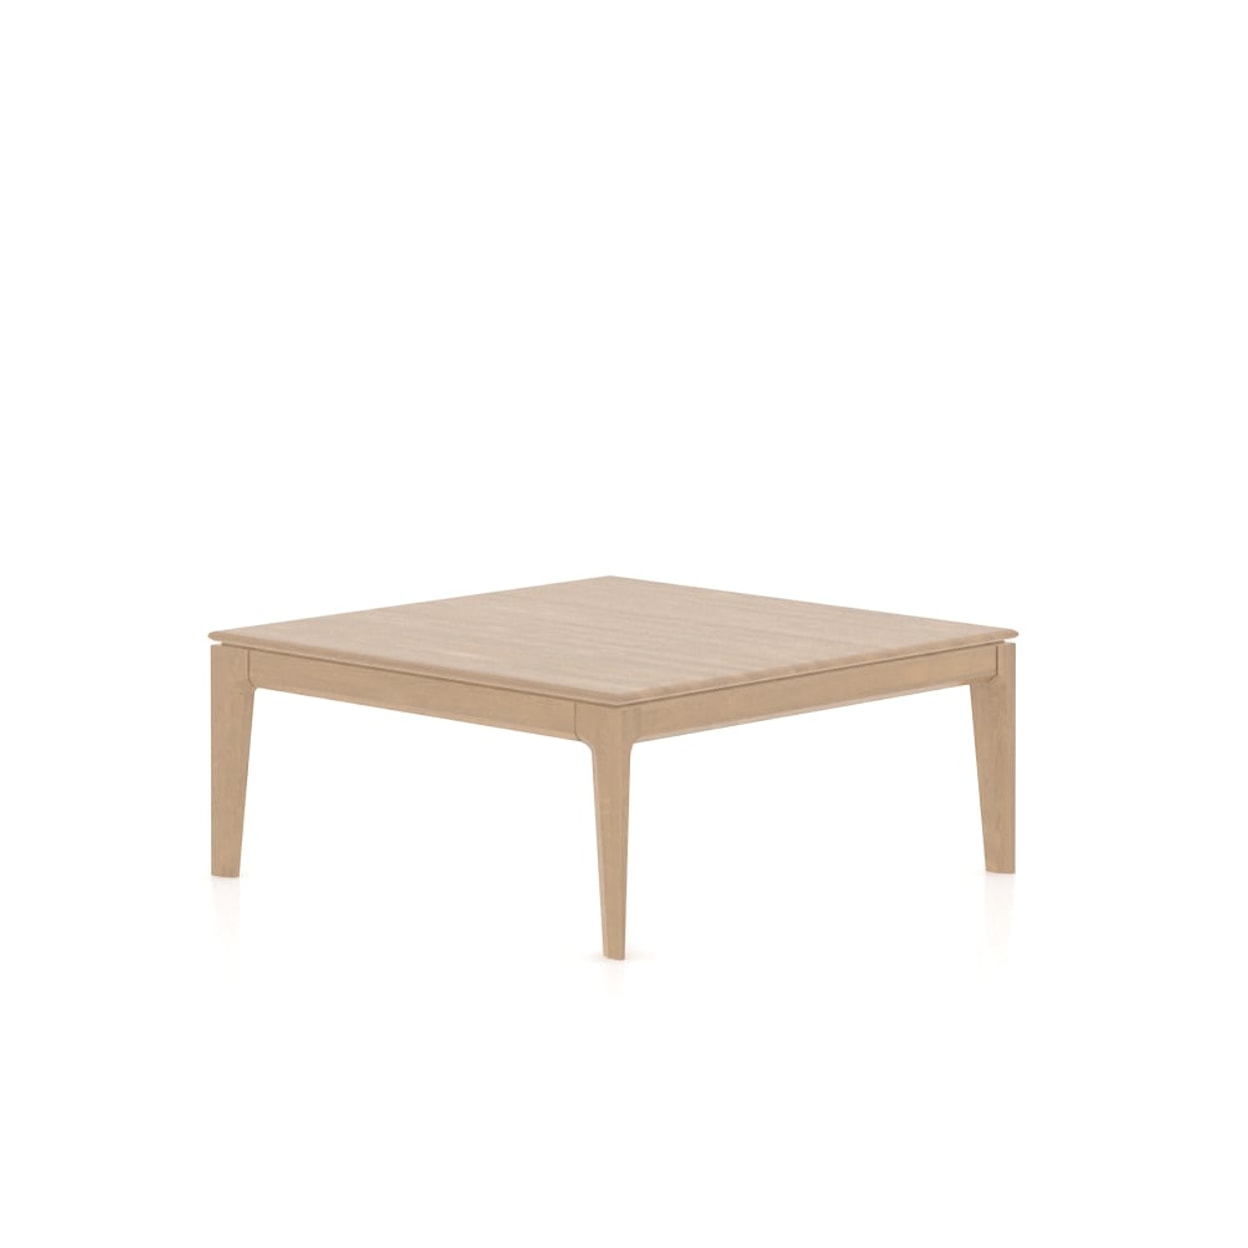 Canadel Accent Essence Square Coffee Table